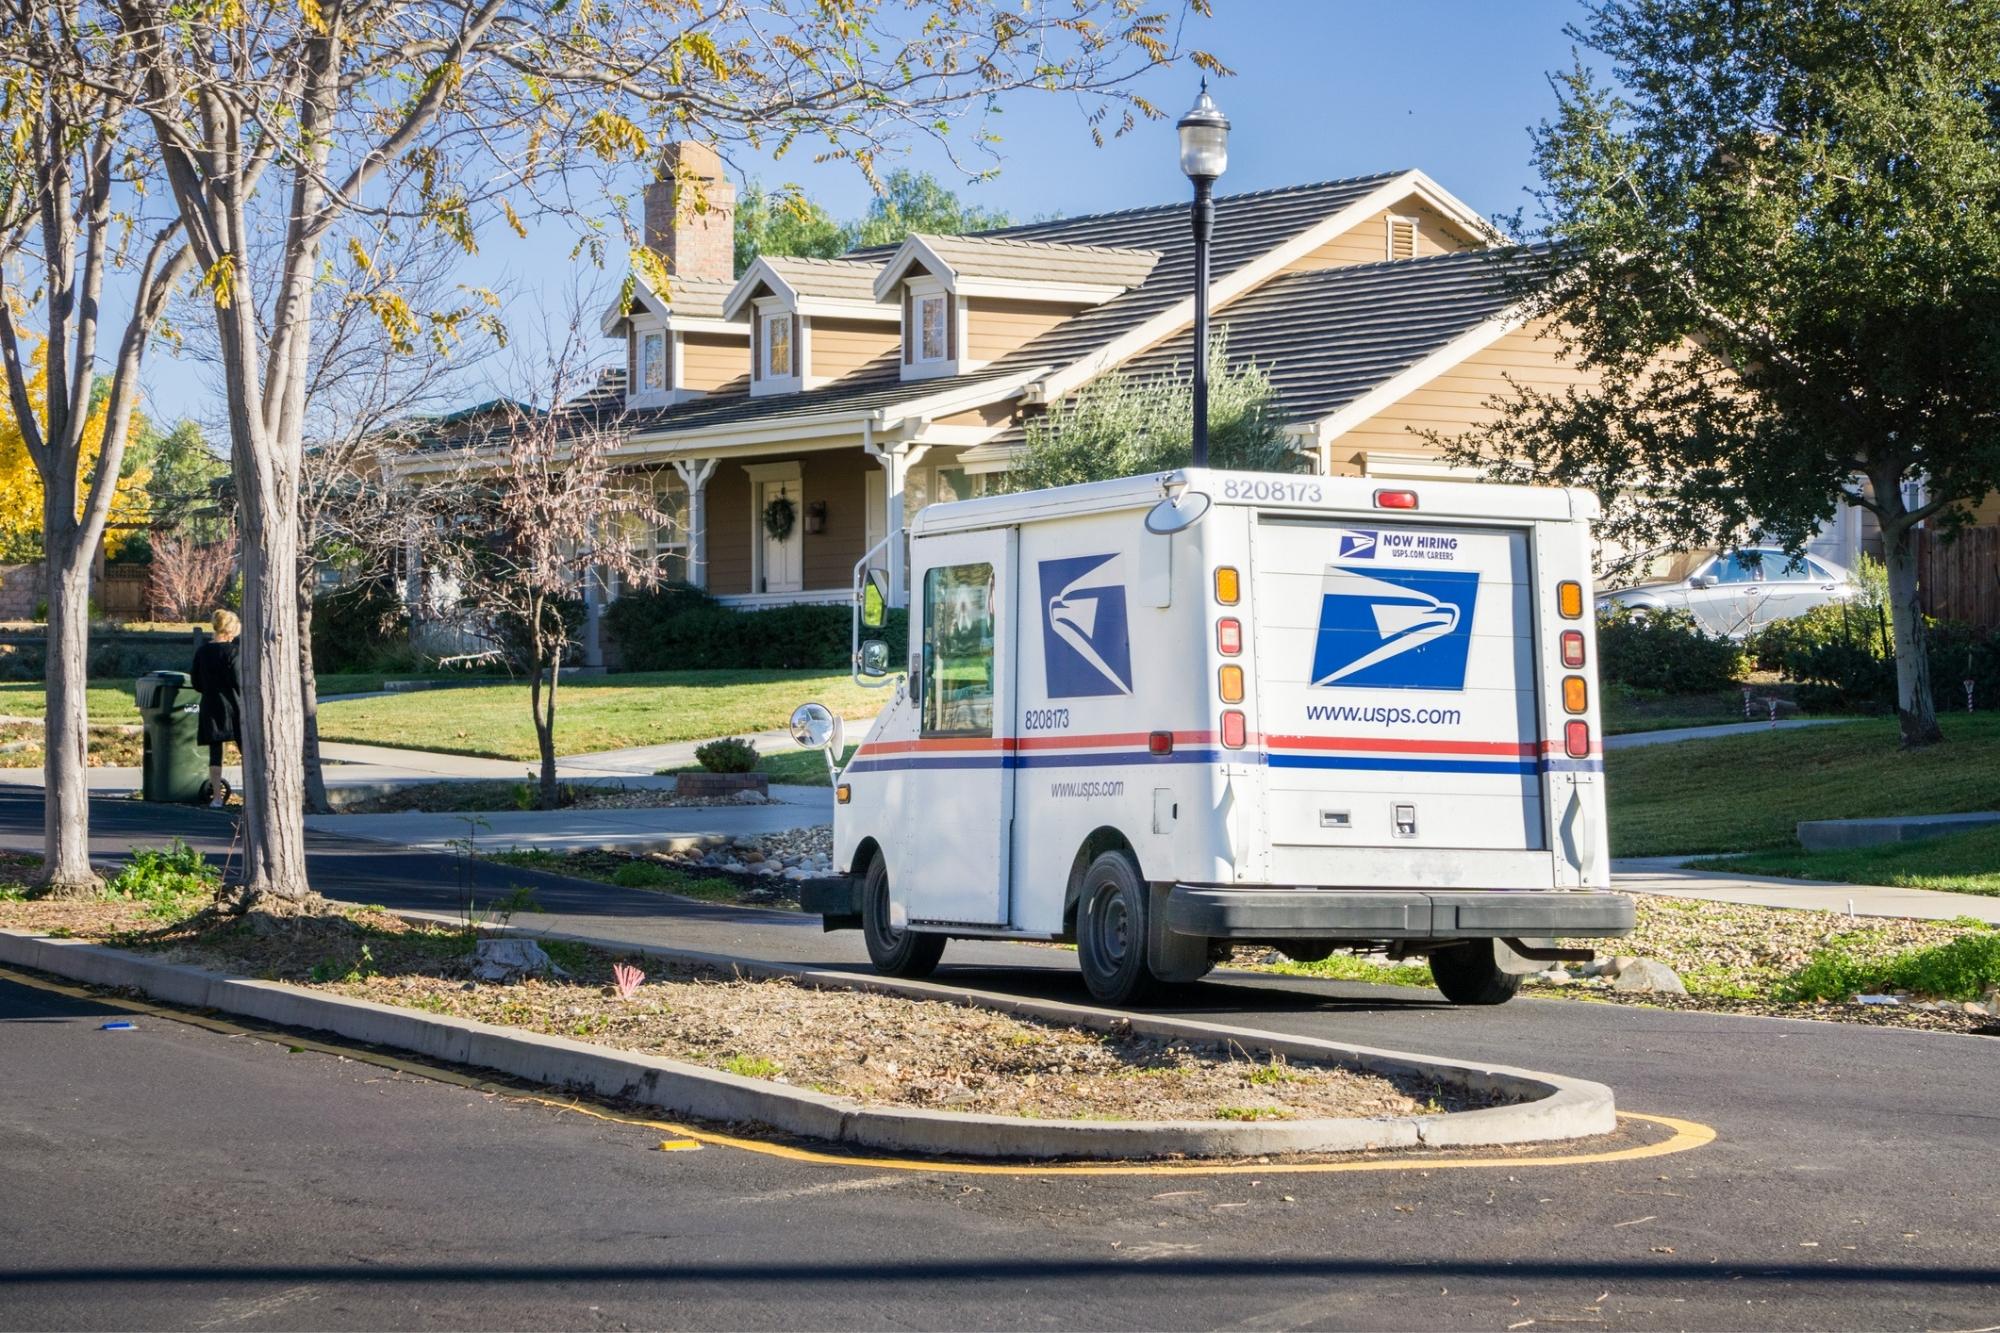 A USPS truck delivering mail in a neighborhood.